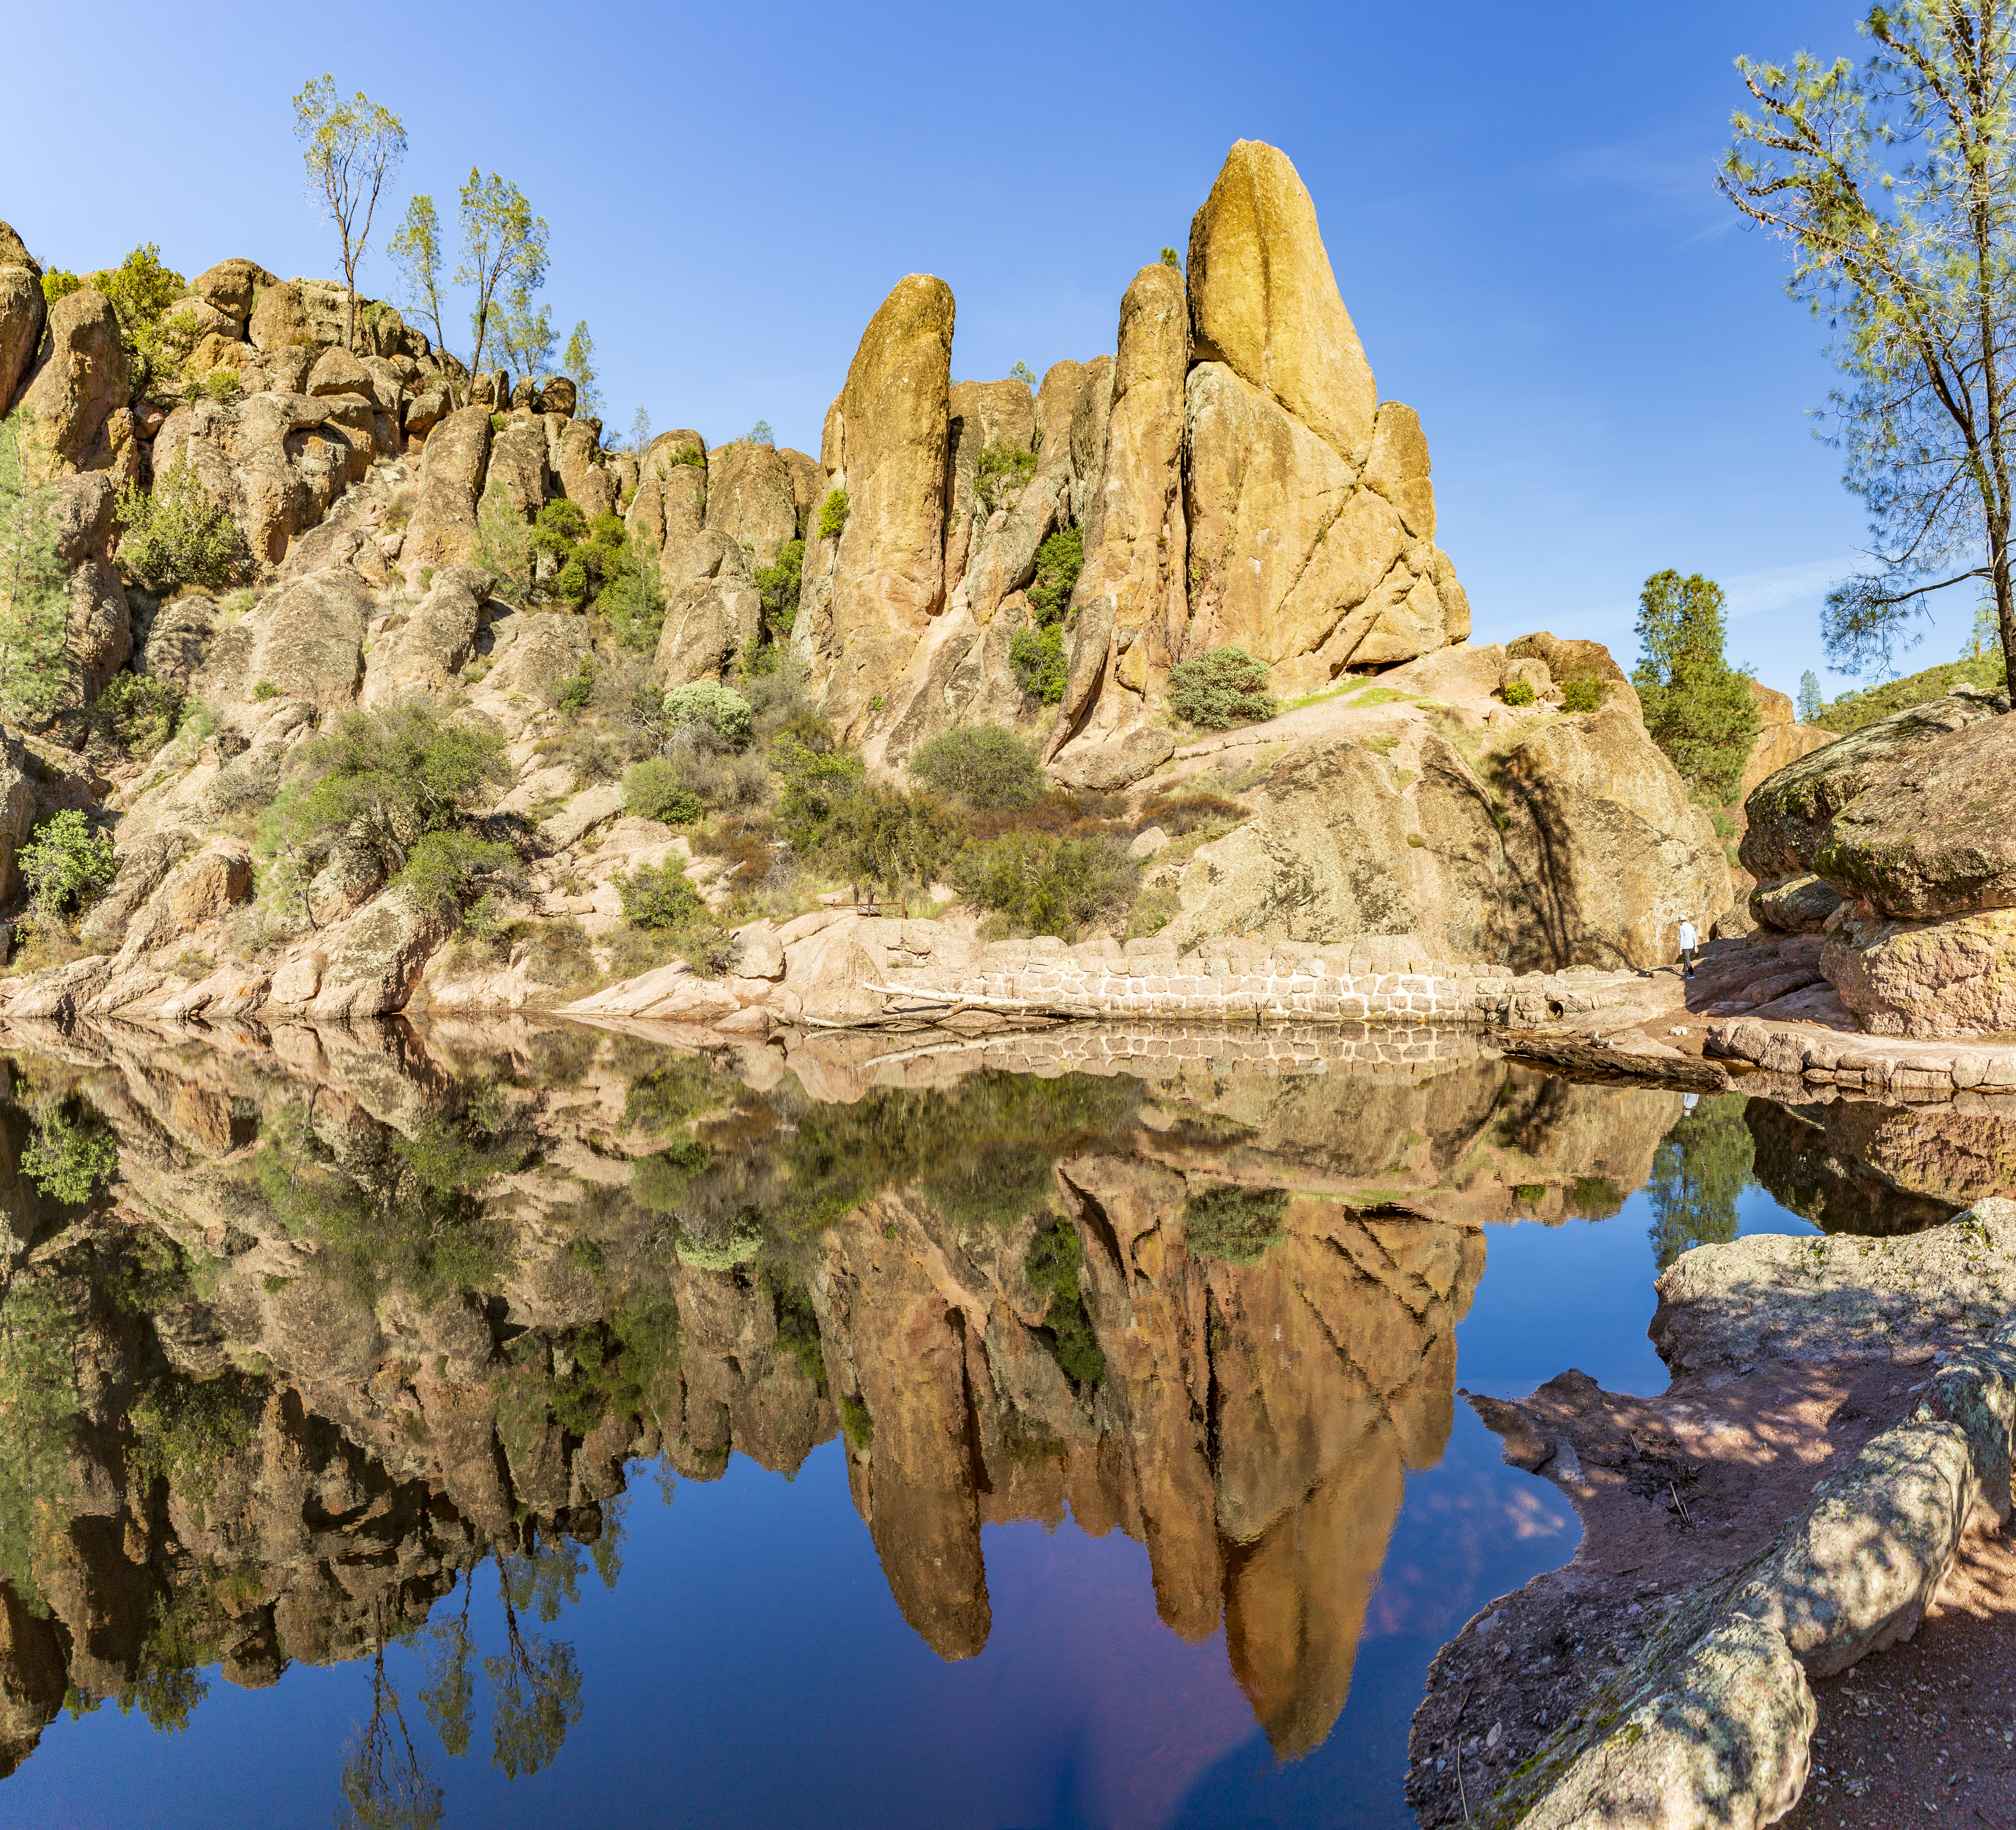 Scenic view of towering rock formations reflected in still water at a tranquil desert oasis